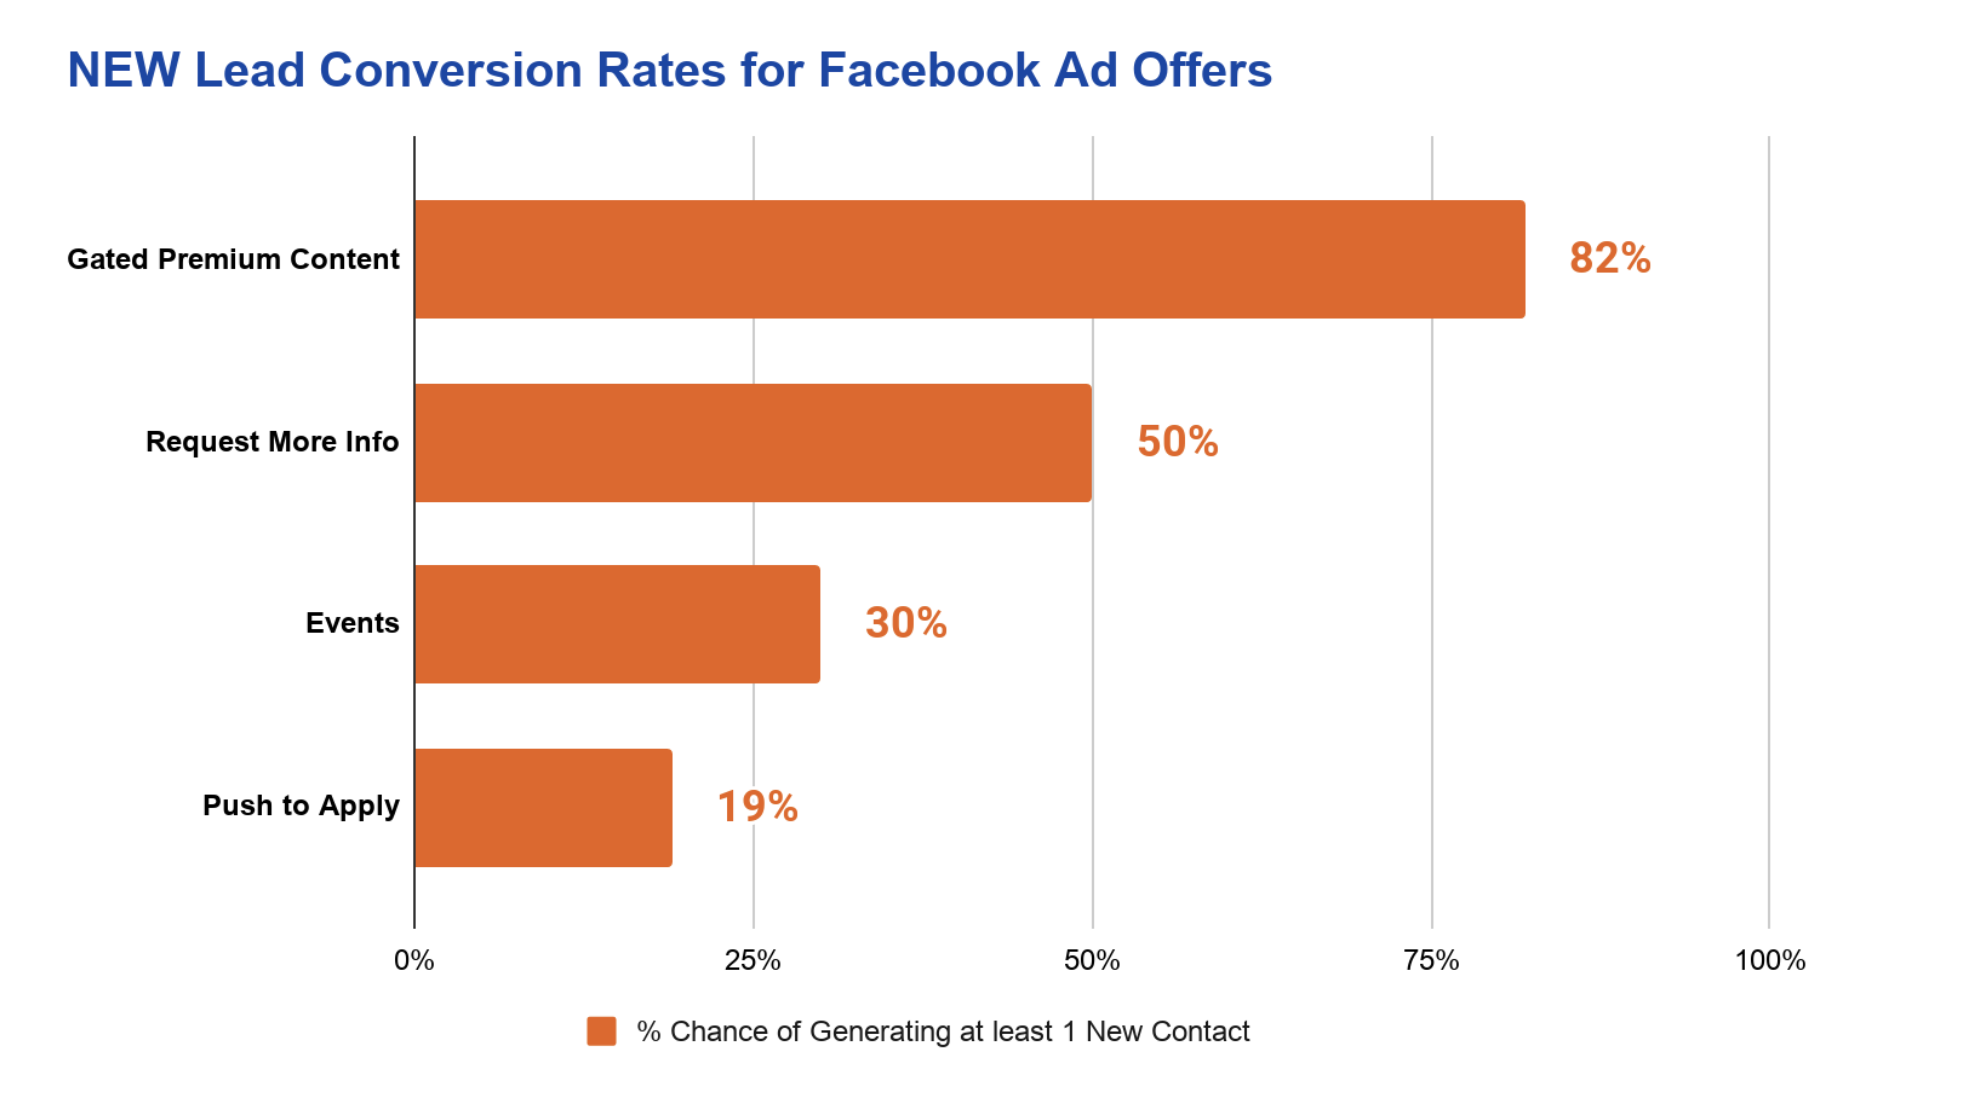 New Lead Conversion Rates for Facebook Ads